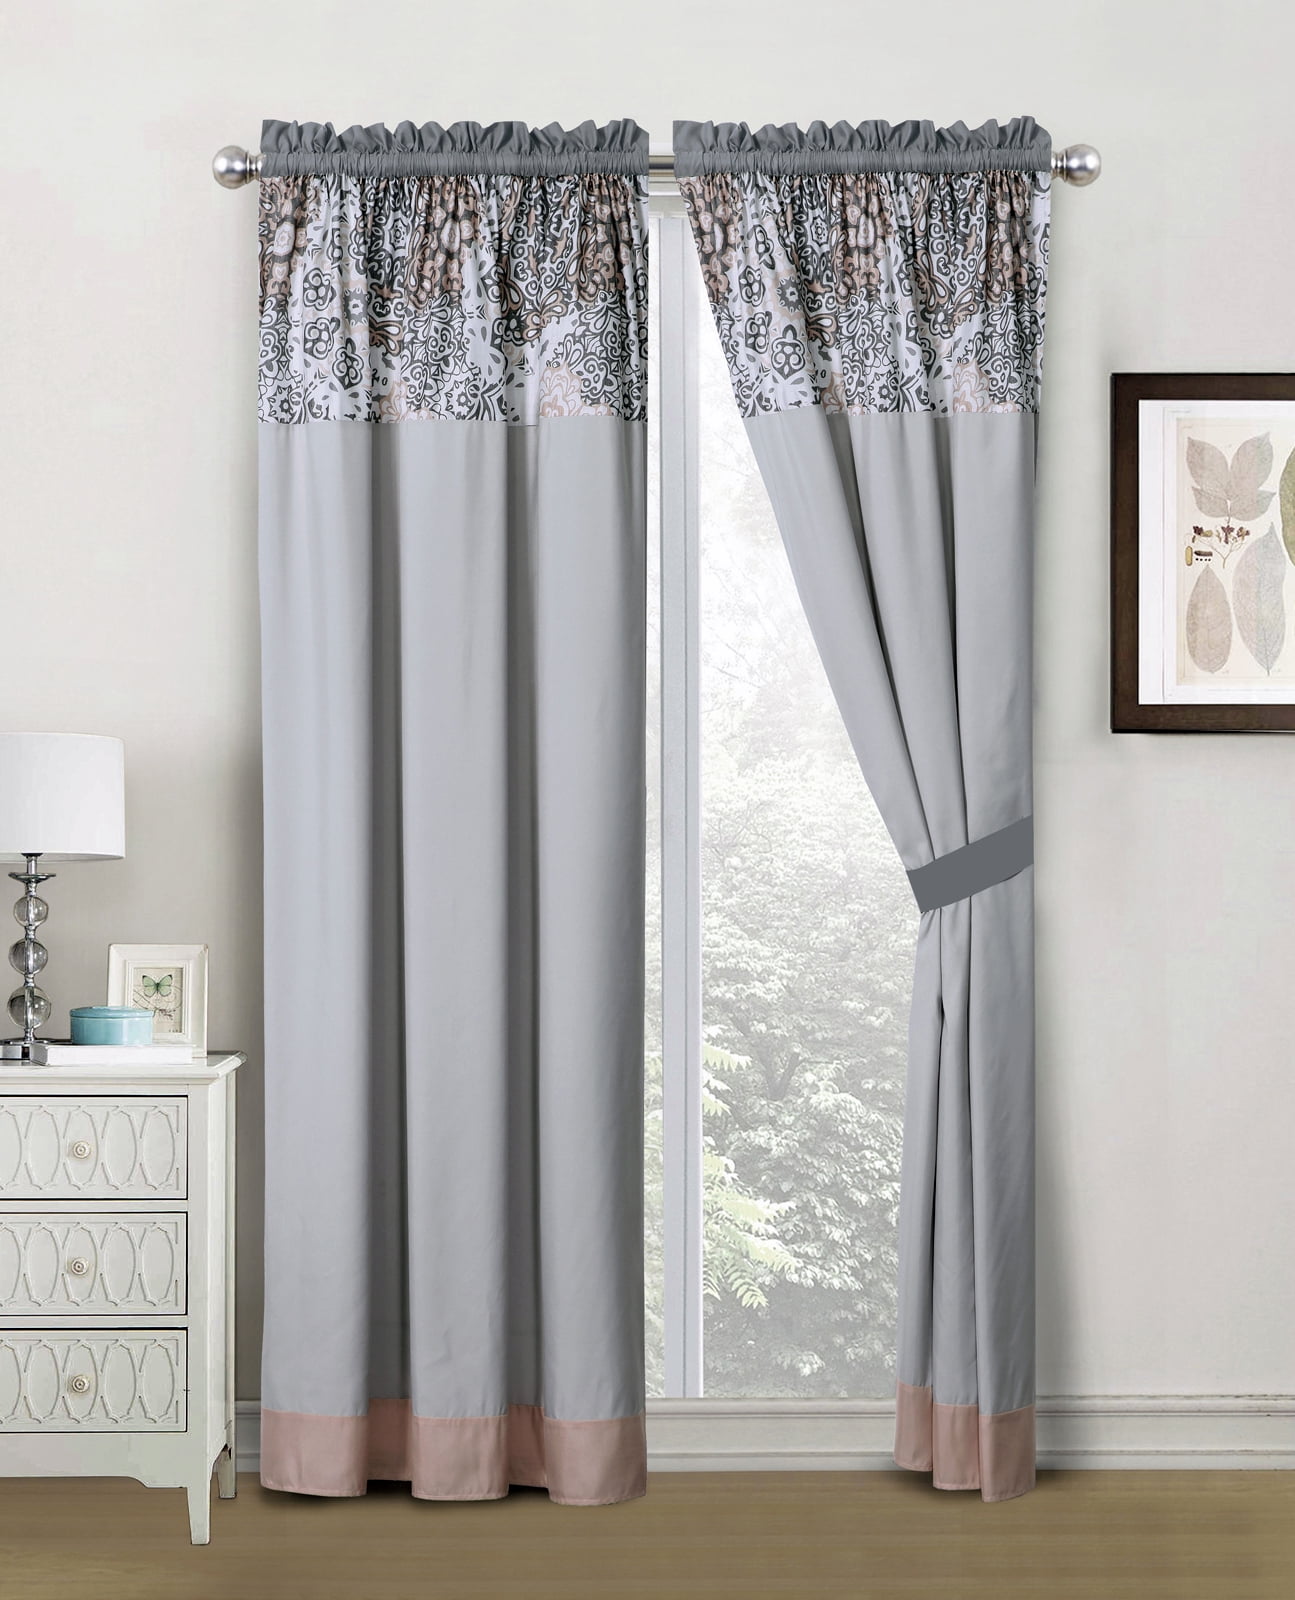 4pc Blue Gold Silver Gray Medallion Curtains Panels Drapes 84 in Valance Tassels 